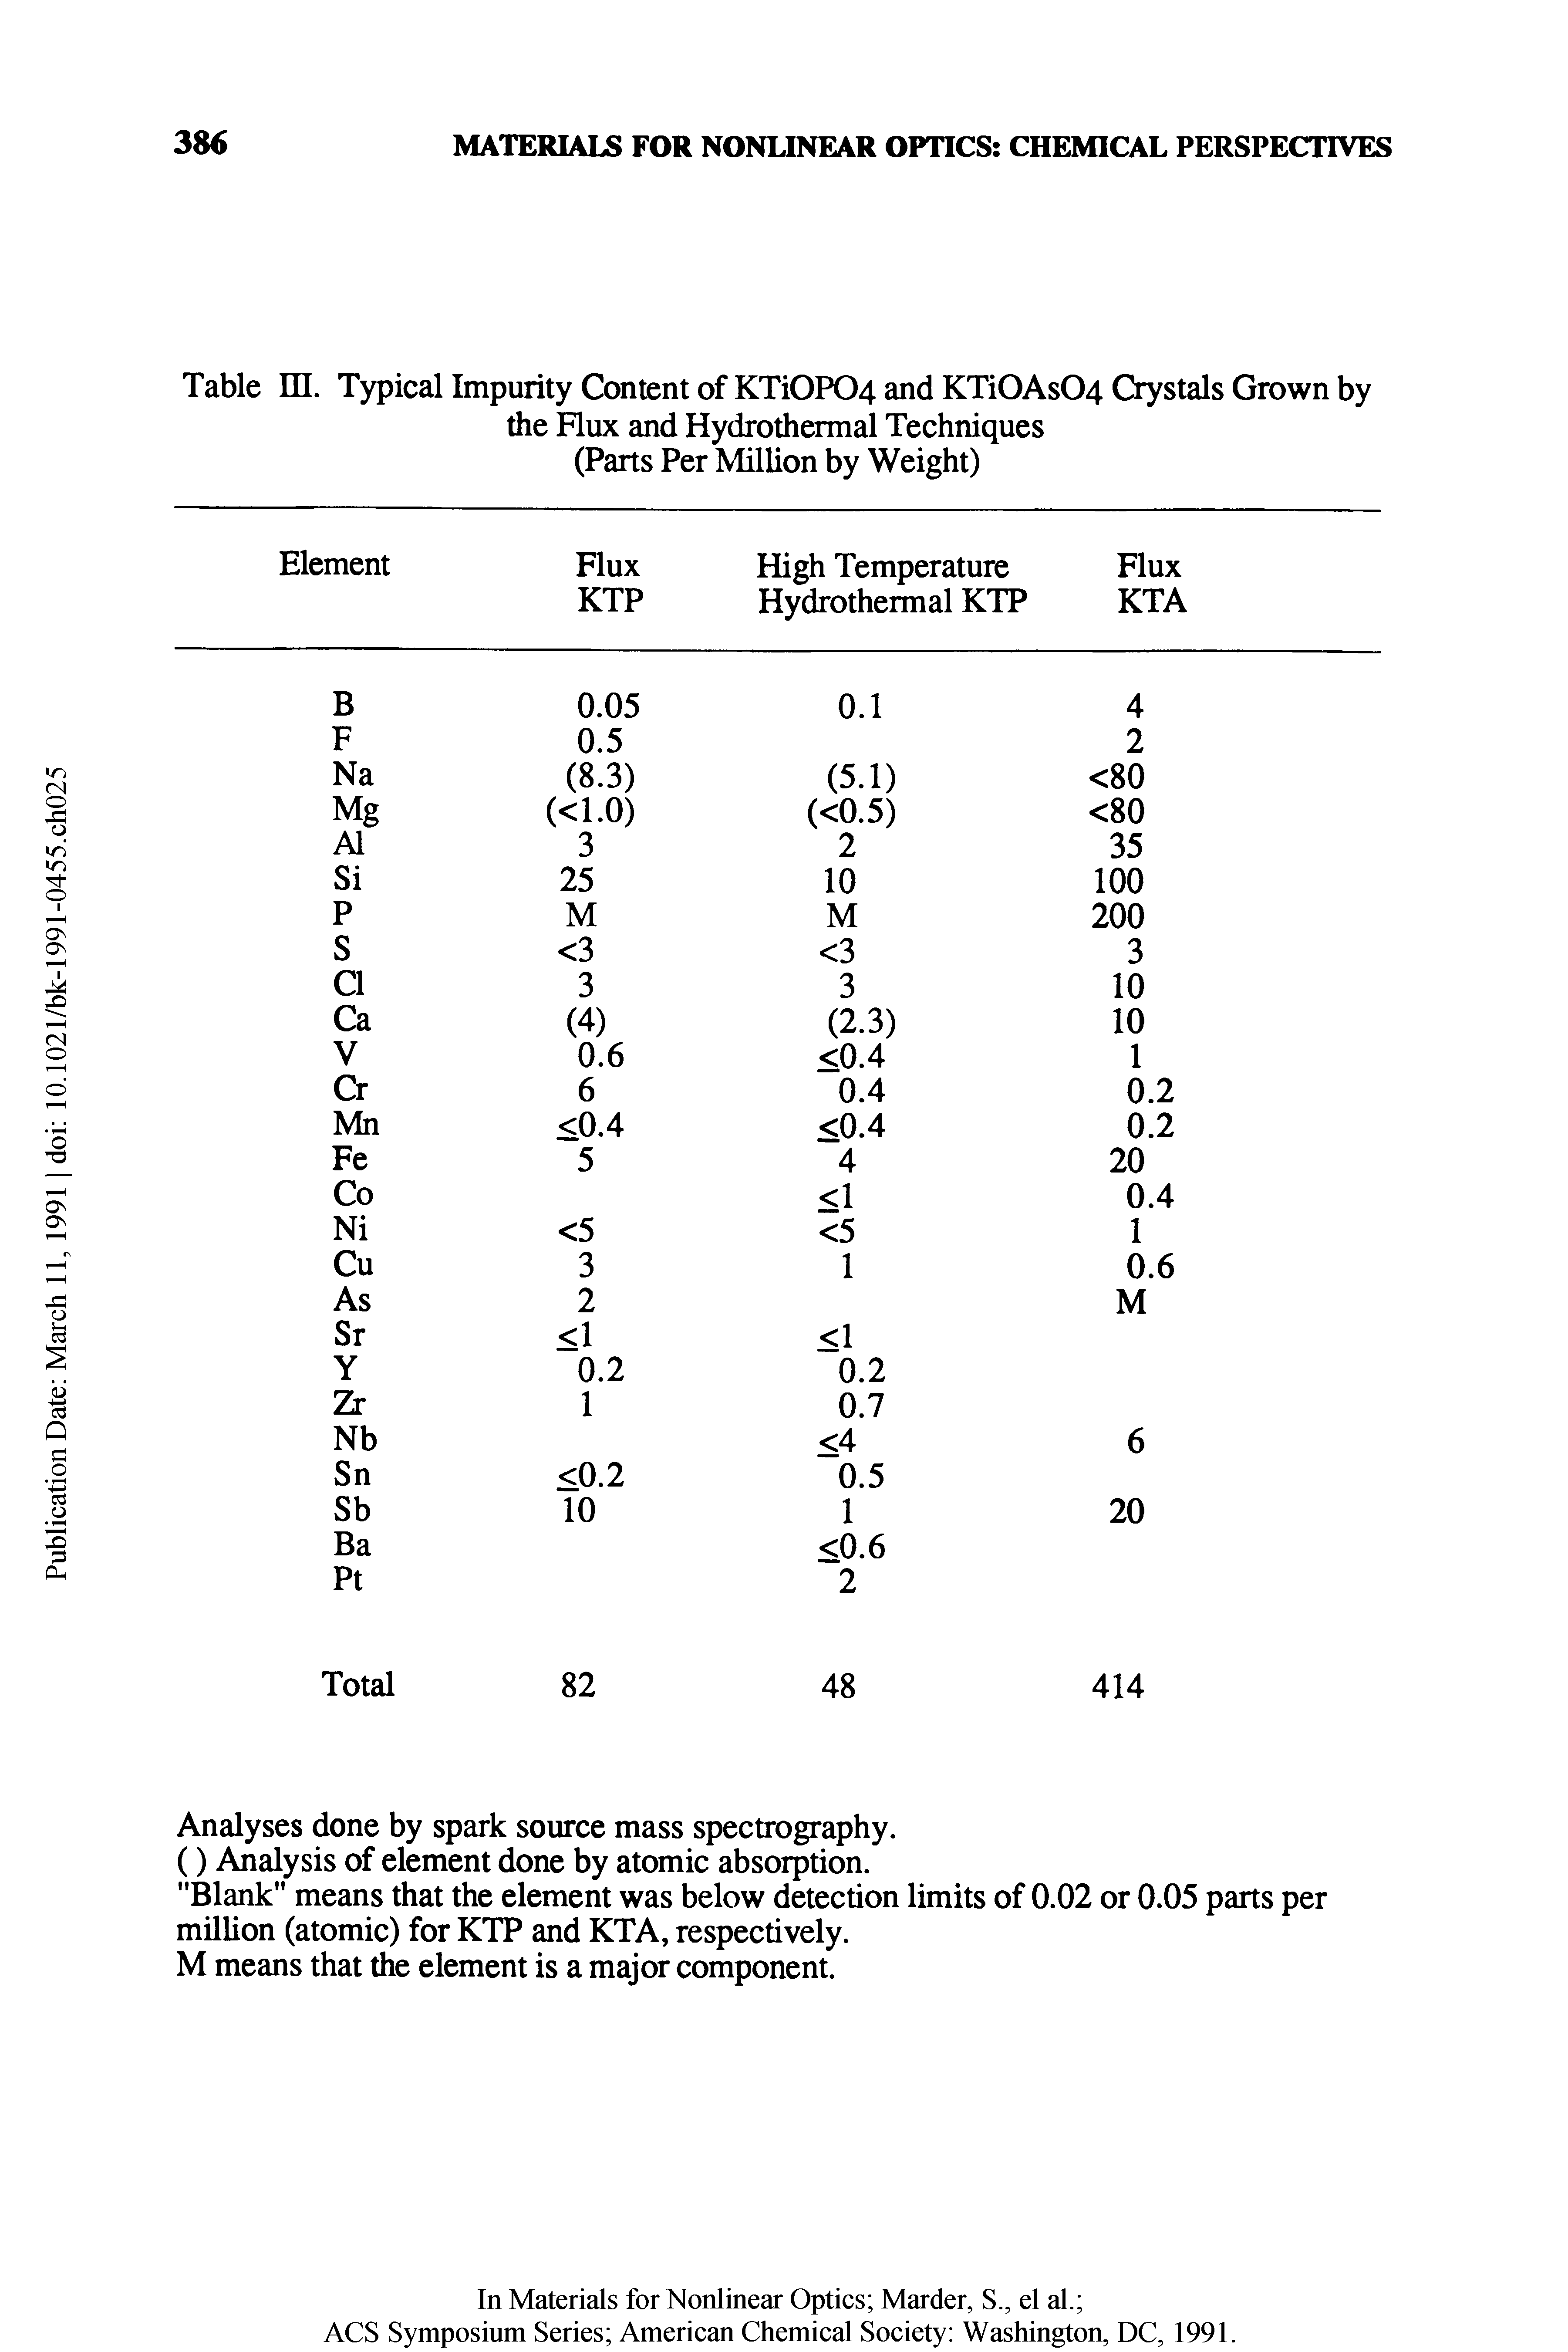 Table HI. Typical Impurity Content of KTi0P04 and KTi0As04 Crystals Grown by the Flux and Hydrothermal Techniques (Parts Per Million by Weight)...